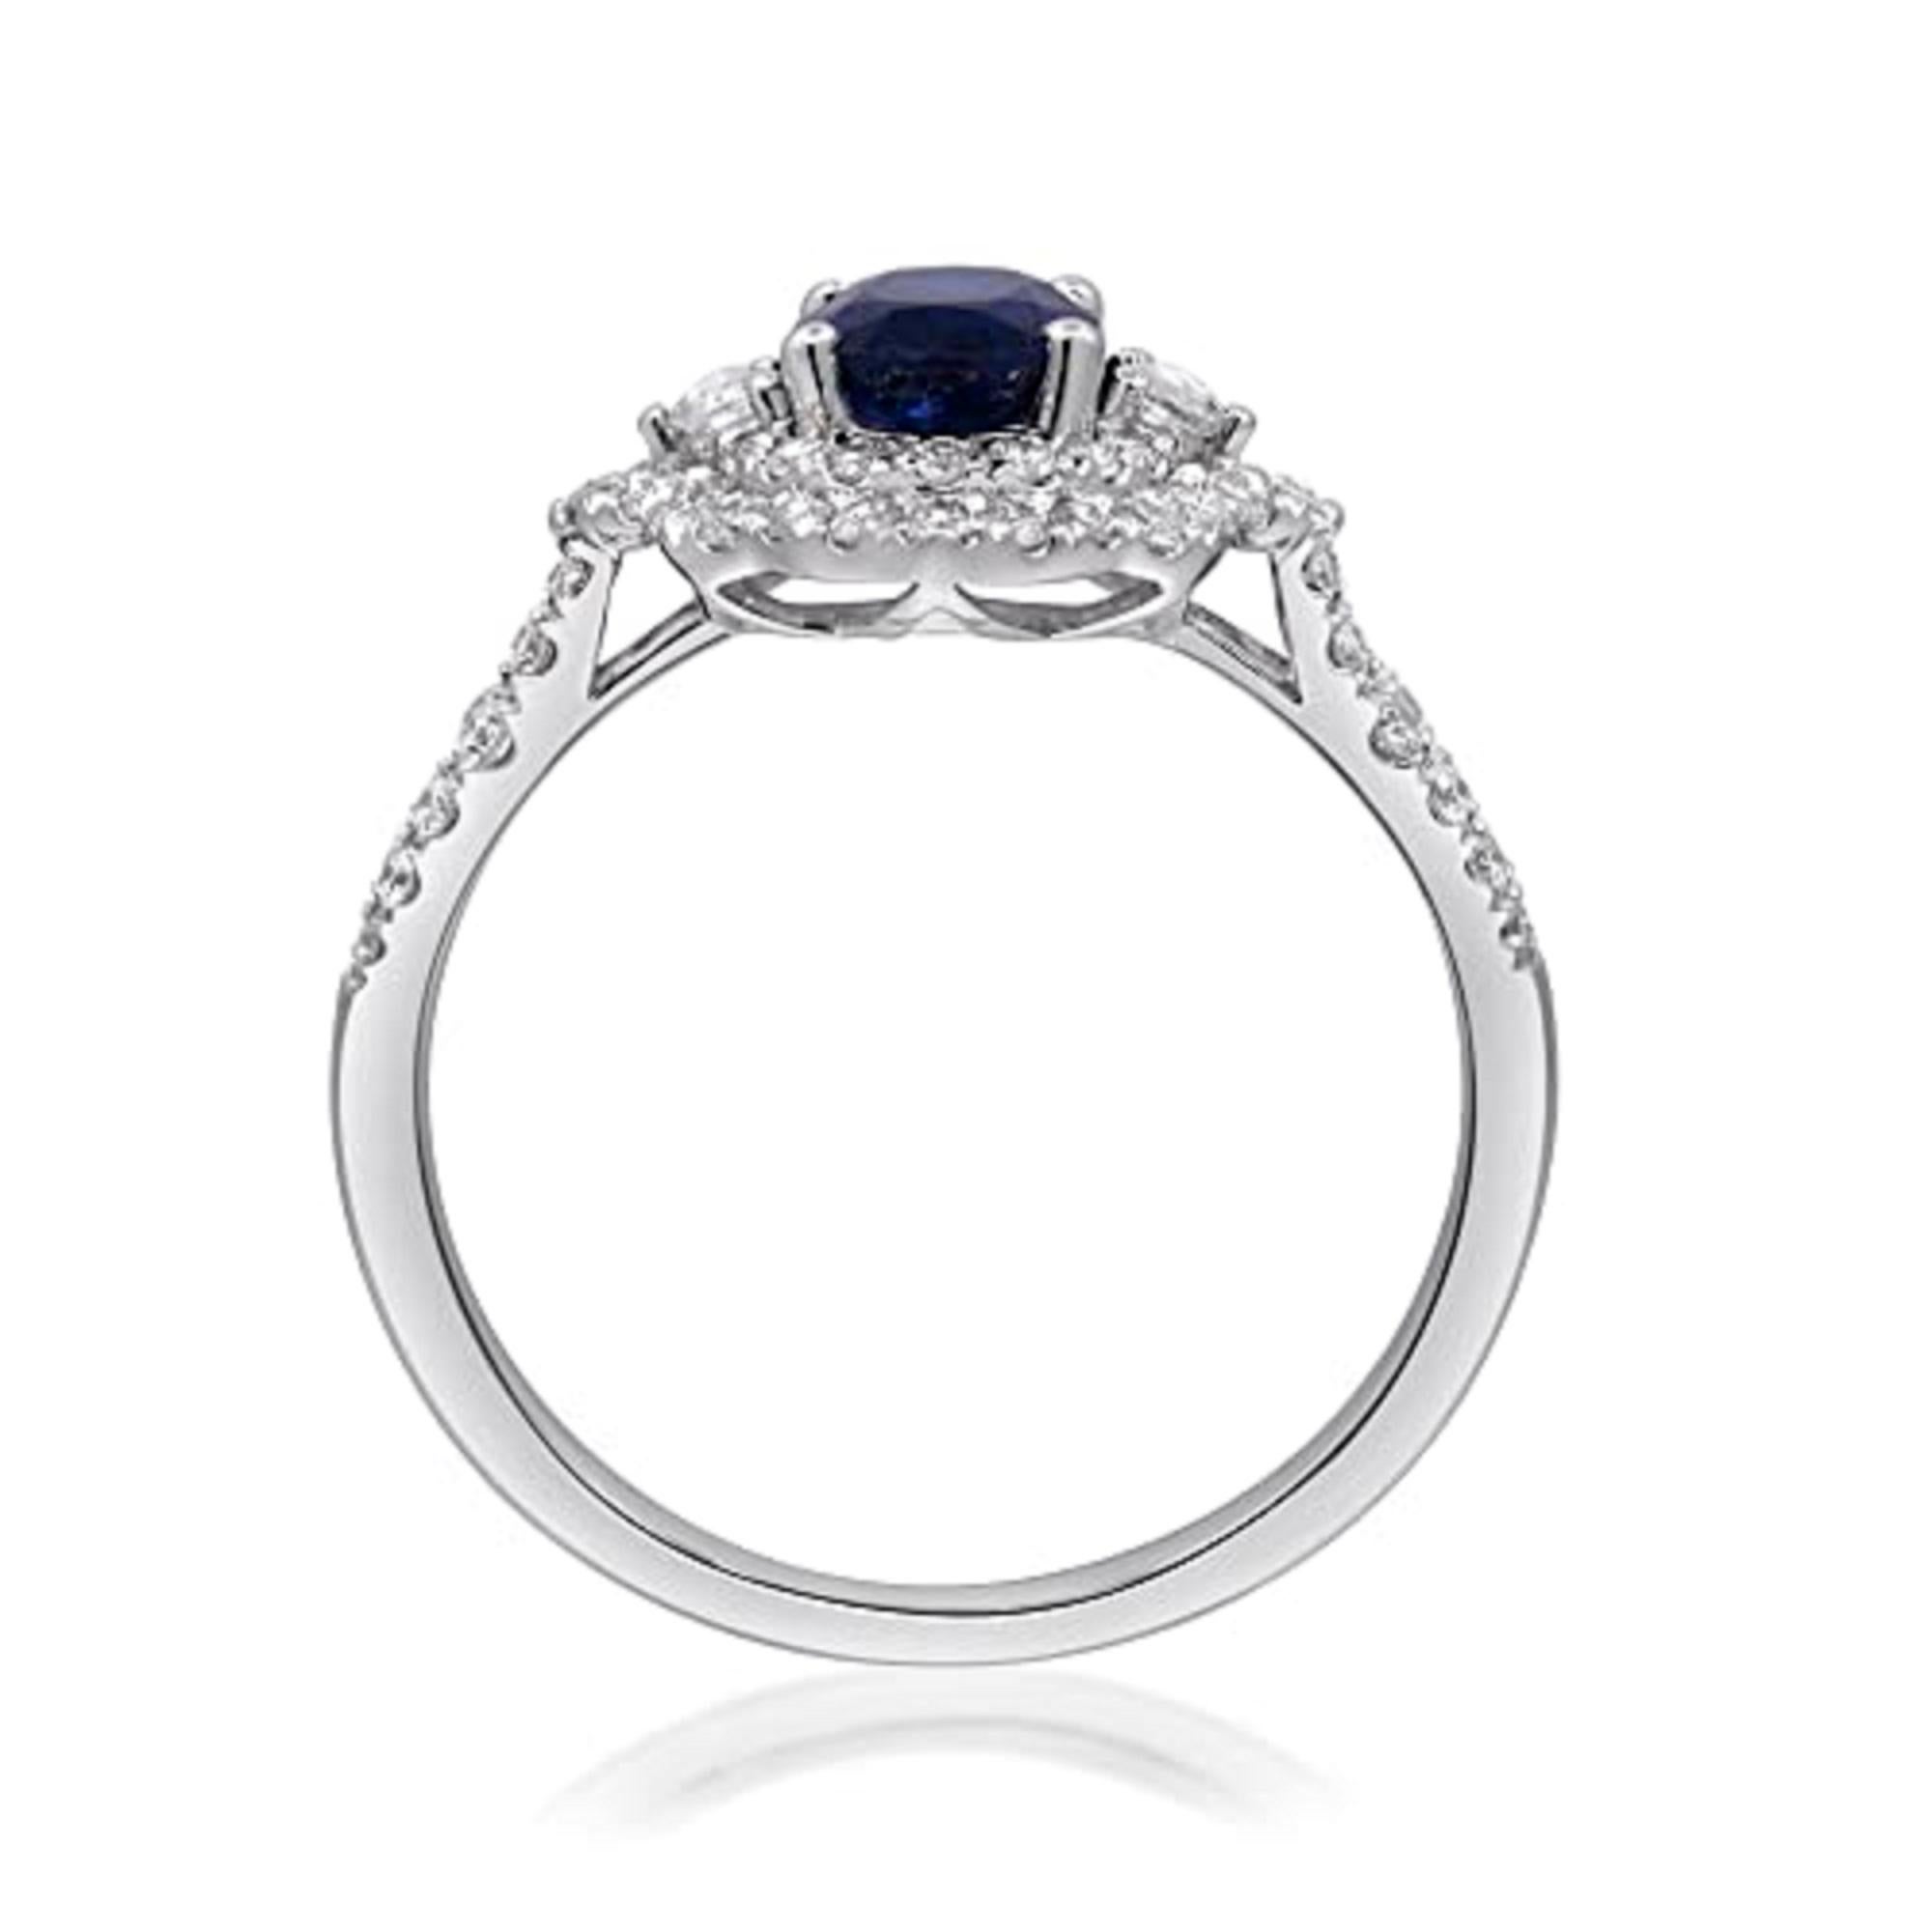 Decorate yourself in elegance with this Ring is crafted from 14-karat White Gold by Gin & Grace. This Ring is made up of 7x5 Oval-Cut (1 pcs) 0.80 carat Blue Sapphire and Round-cut White Diamond (64 Pcs) 0.56 Carat. This Ring is weight 2.56 grams.